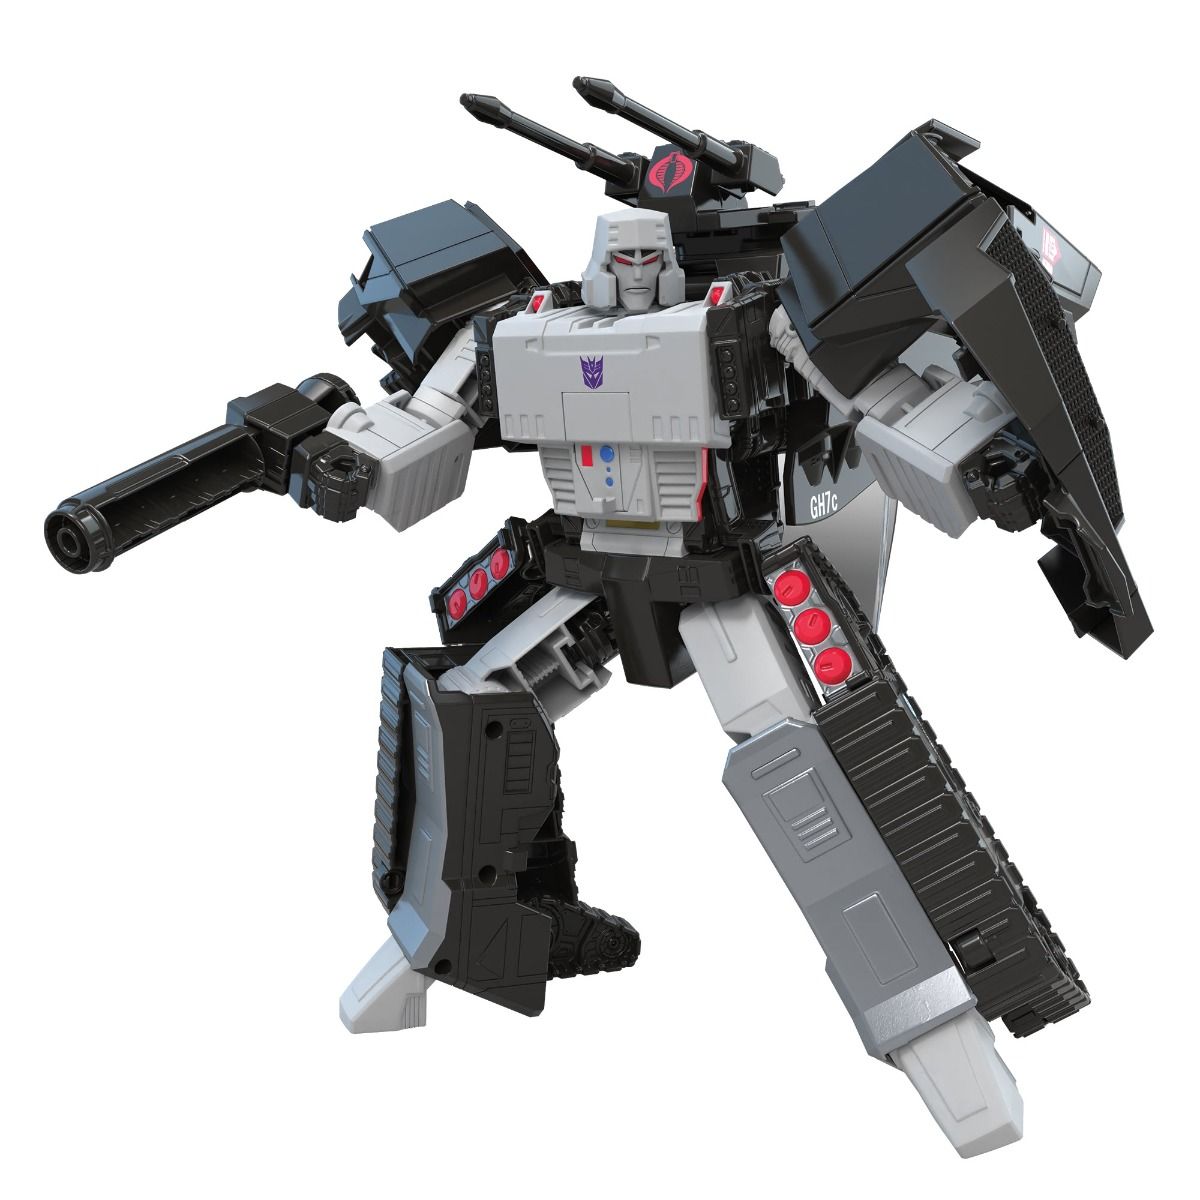 Takara Tomy Transformers Mb-14 Megatron Action Figure for sale online 